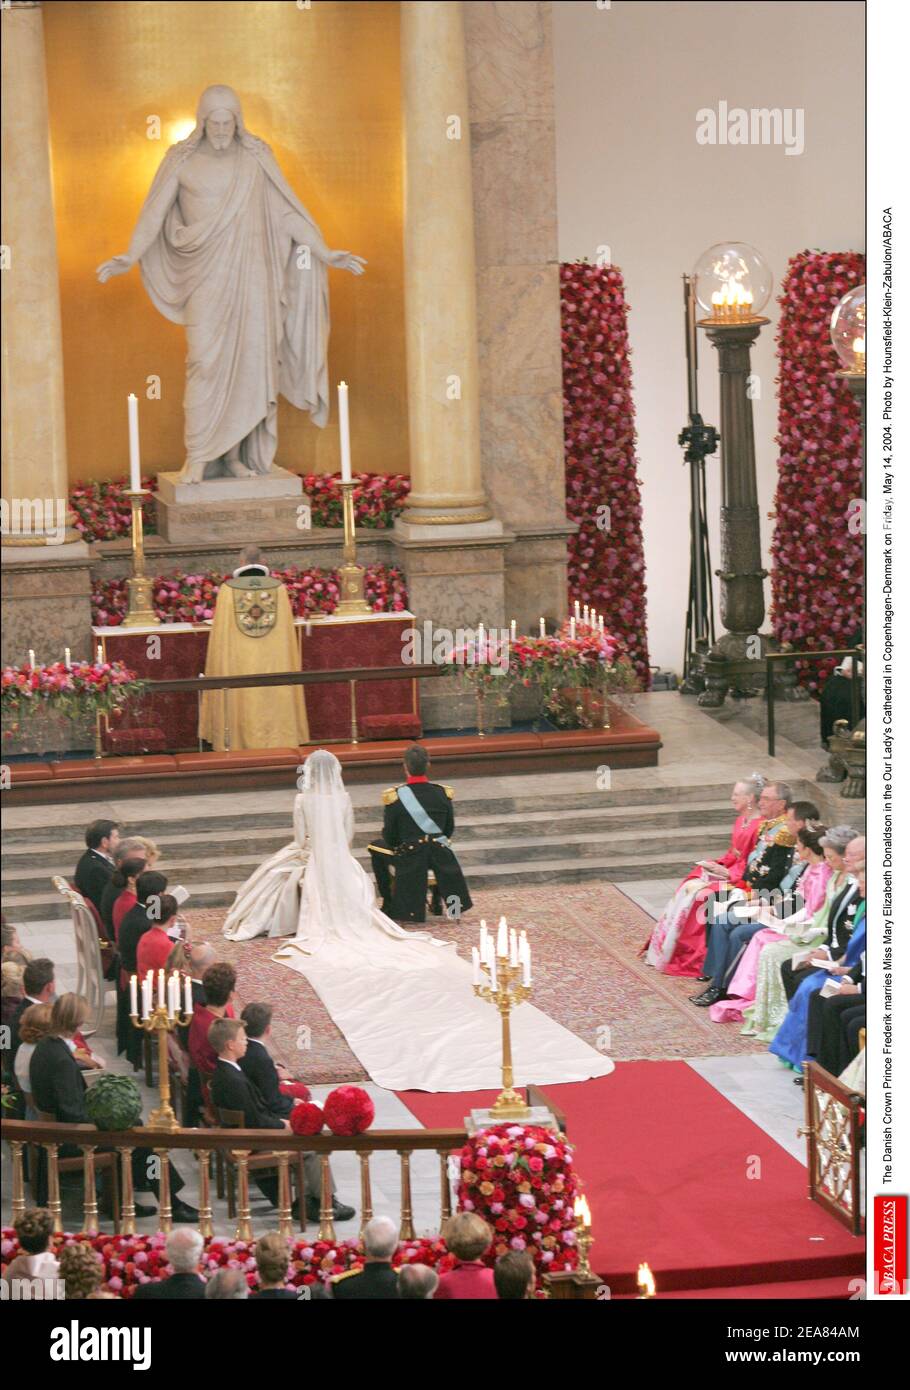 The Danish Crown Prince Frederik marries Miss Mary Elizabeth Donaldson in the Our Lady's Cathedral in Copenhagen-Denmark on Friday, May 14, 2004. Photo by Hounsfield-Klein-Zabulon/ABACA Stock Photo